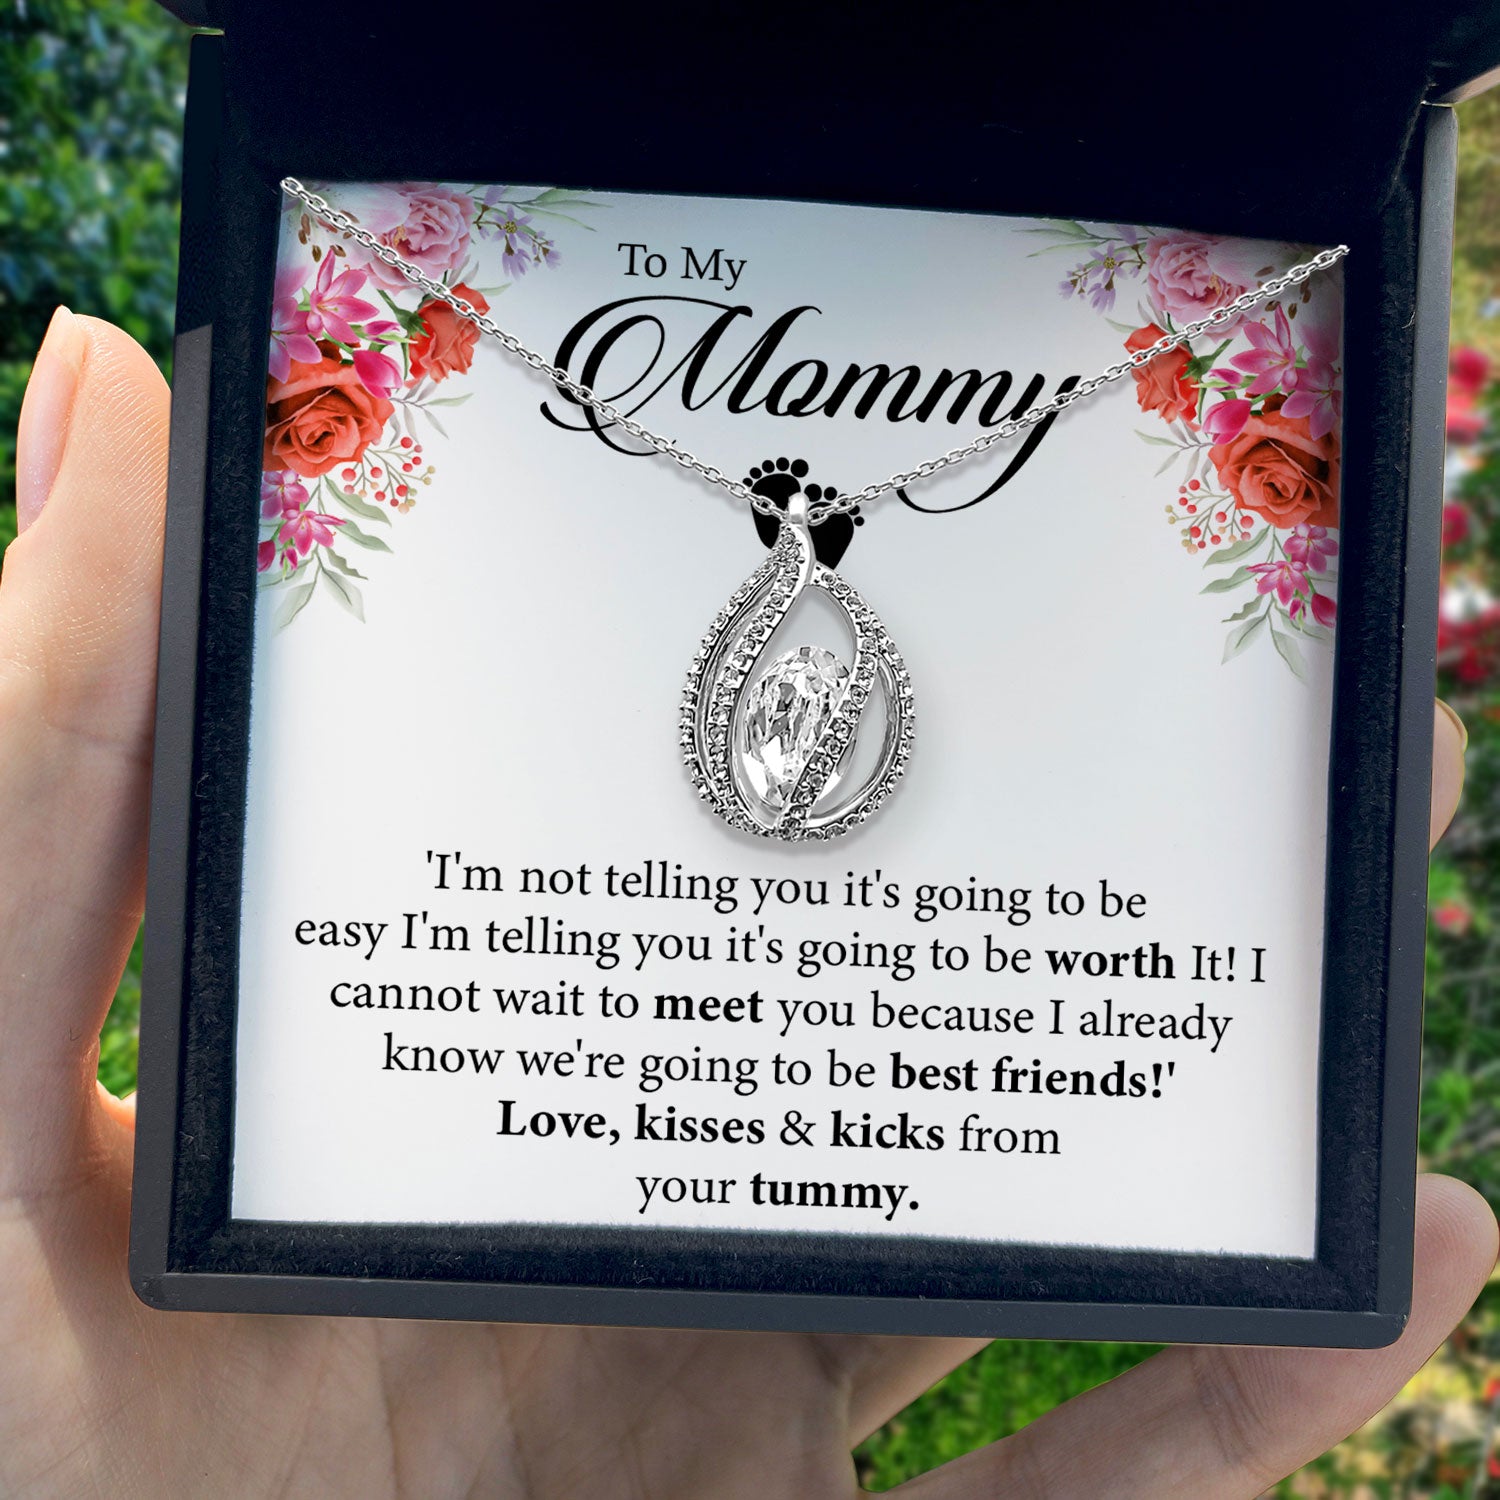 To My Mommy - I Can not Wait To Meet You Because I Already Know We're Going To Be Best Friend! - Orbital Birdcage Necklace